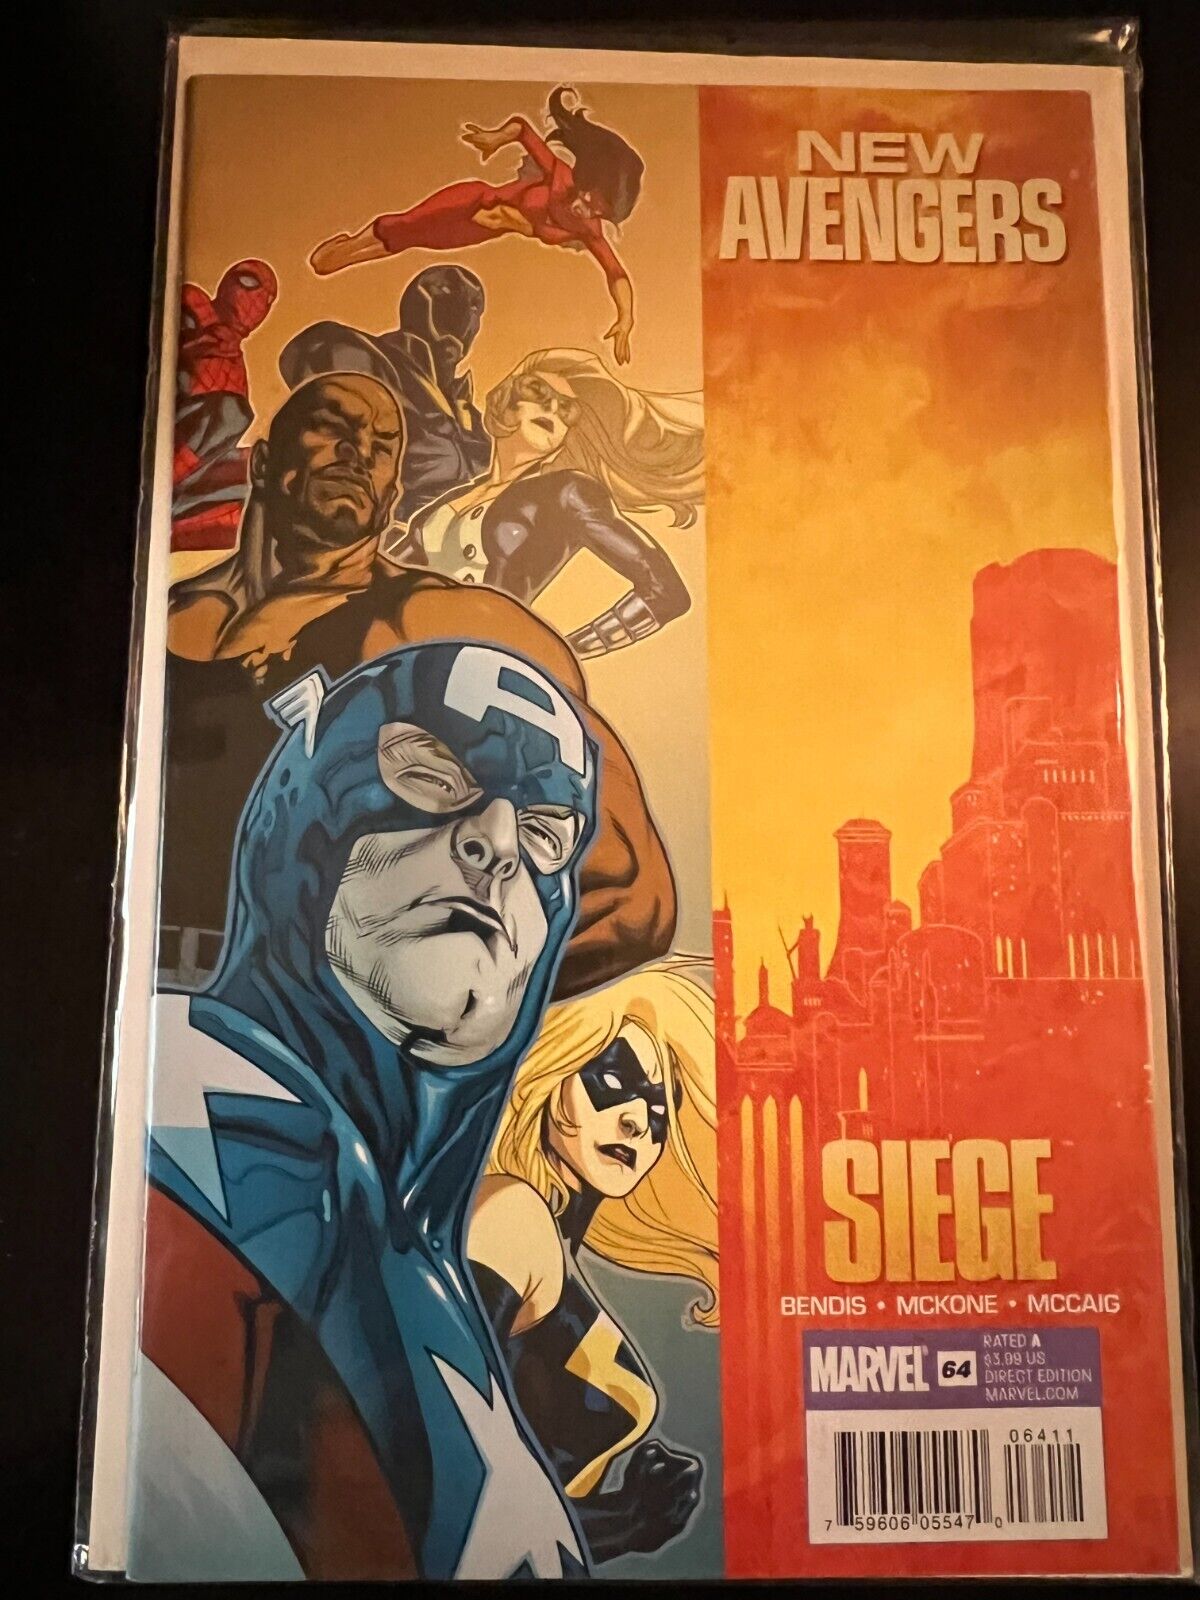 New Avengers #62-64 Siege Combined Shipping Offered